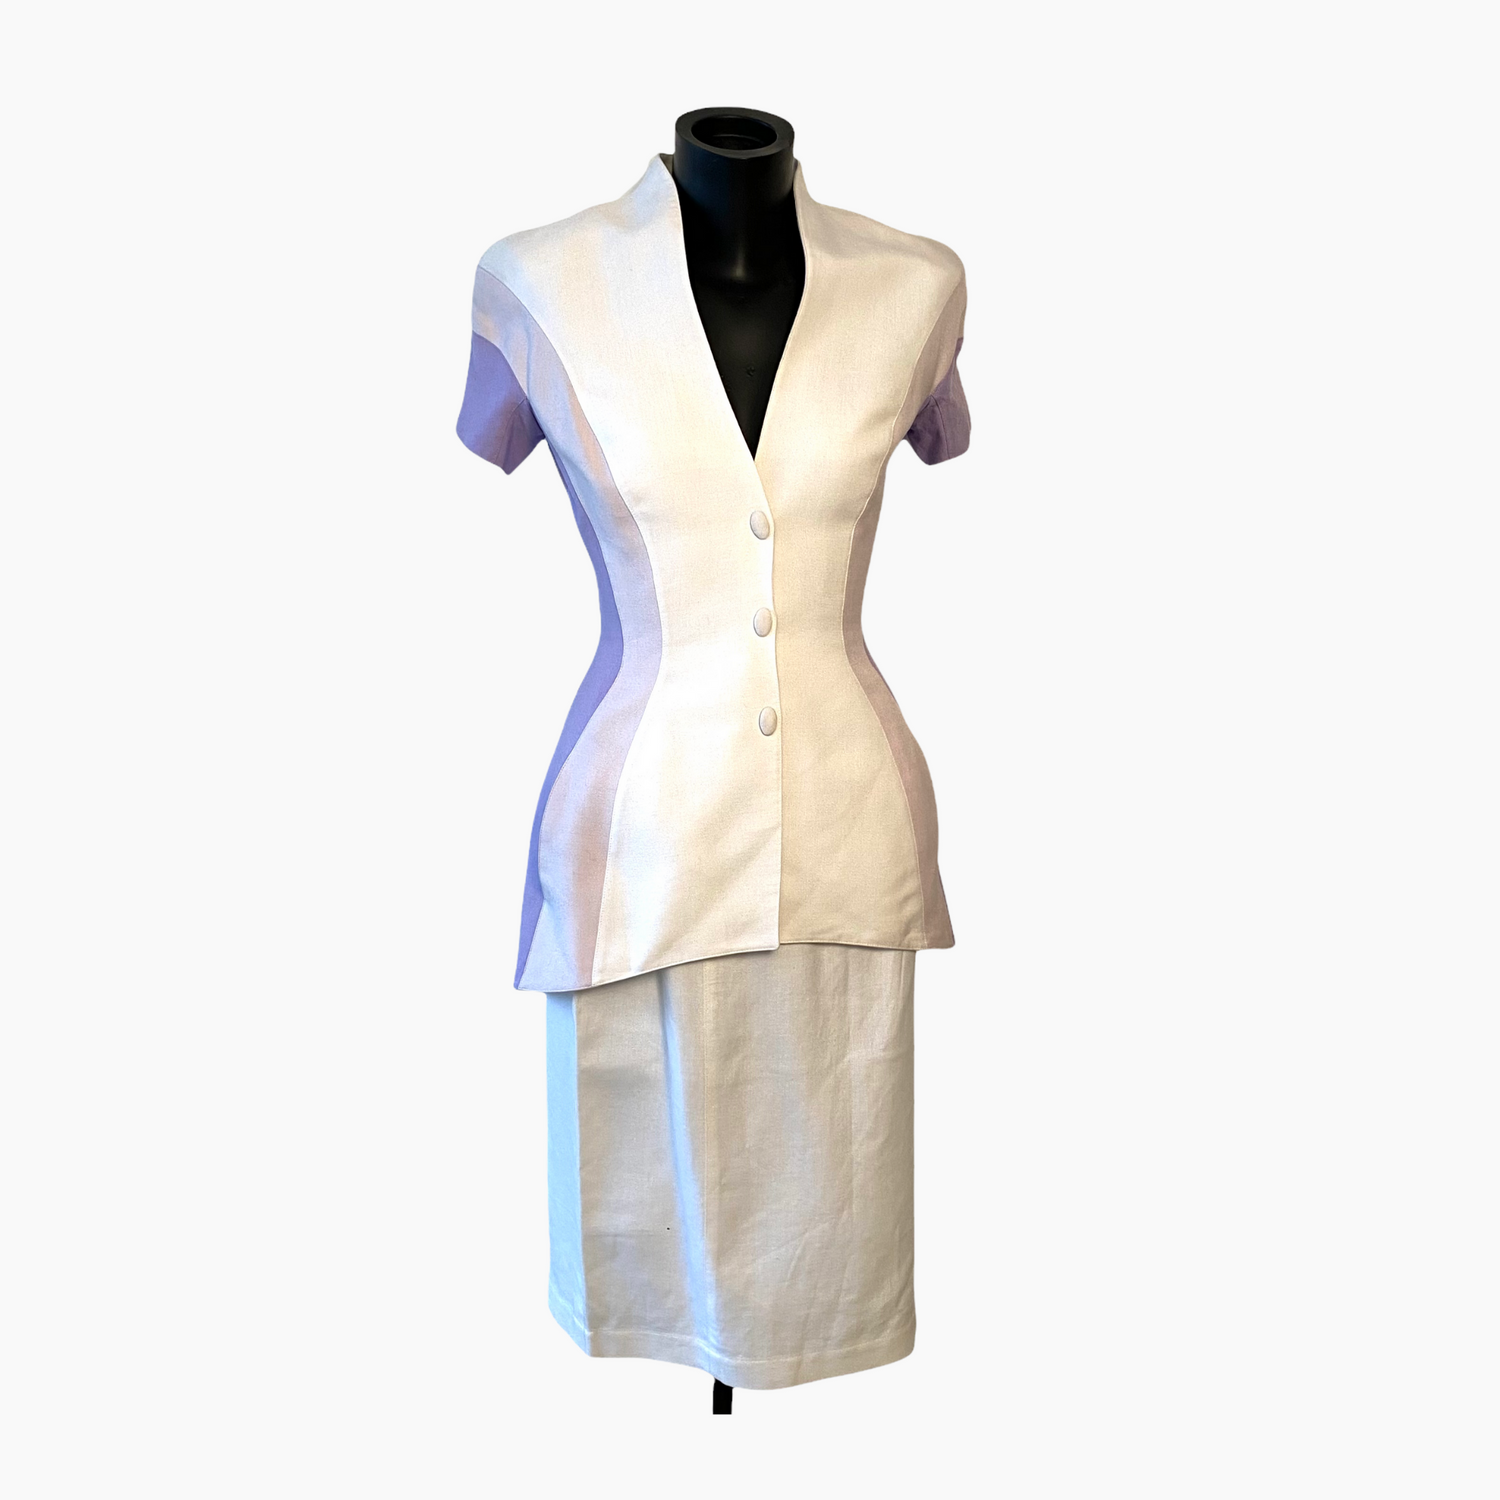 Thierry Mugler vintage iconic ensemble white and purple detailing - S- 1999 Collection